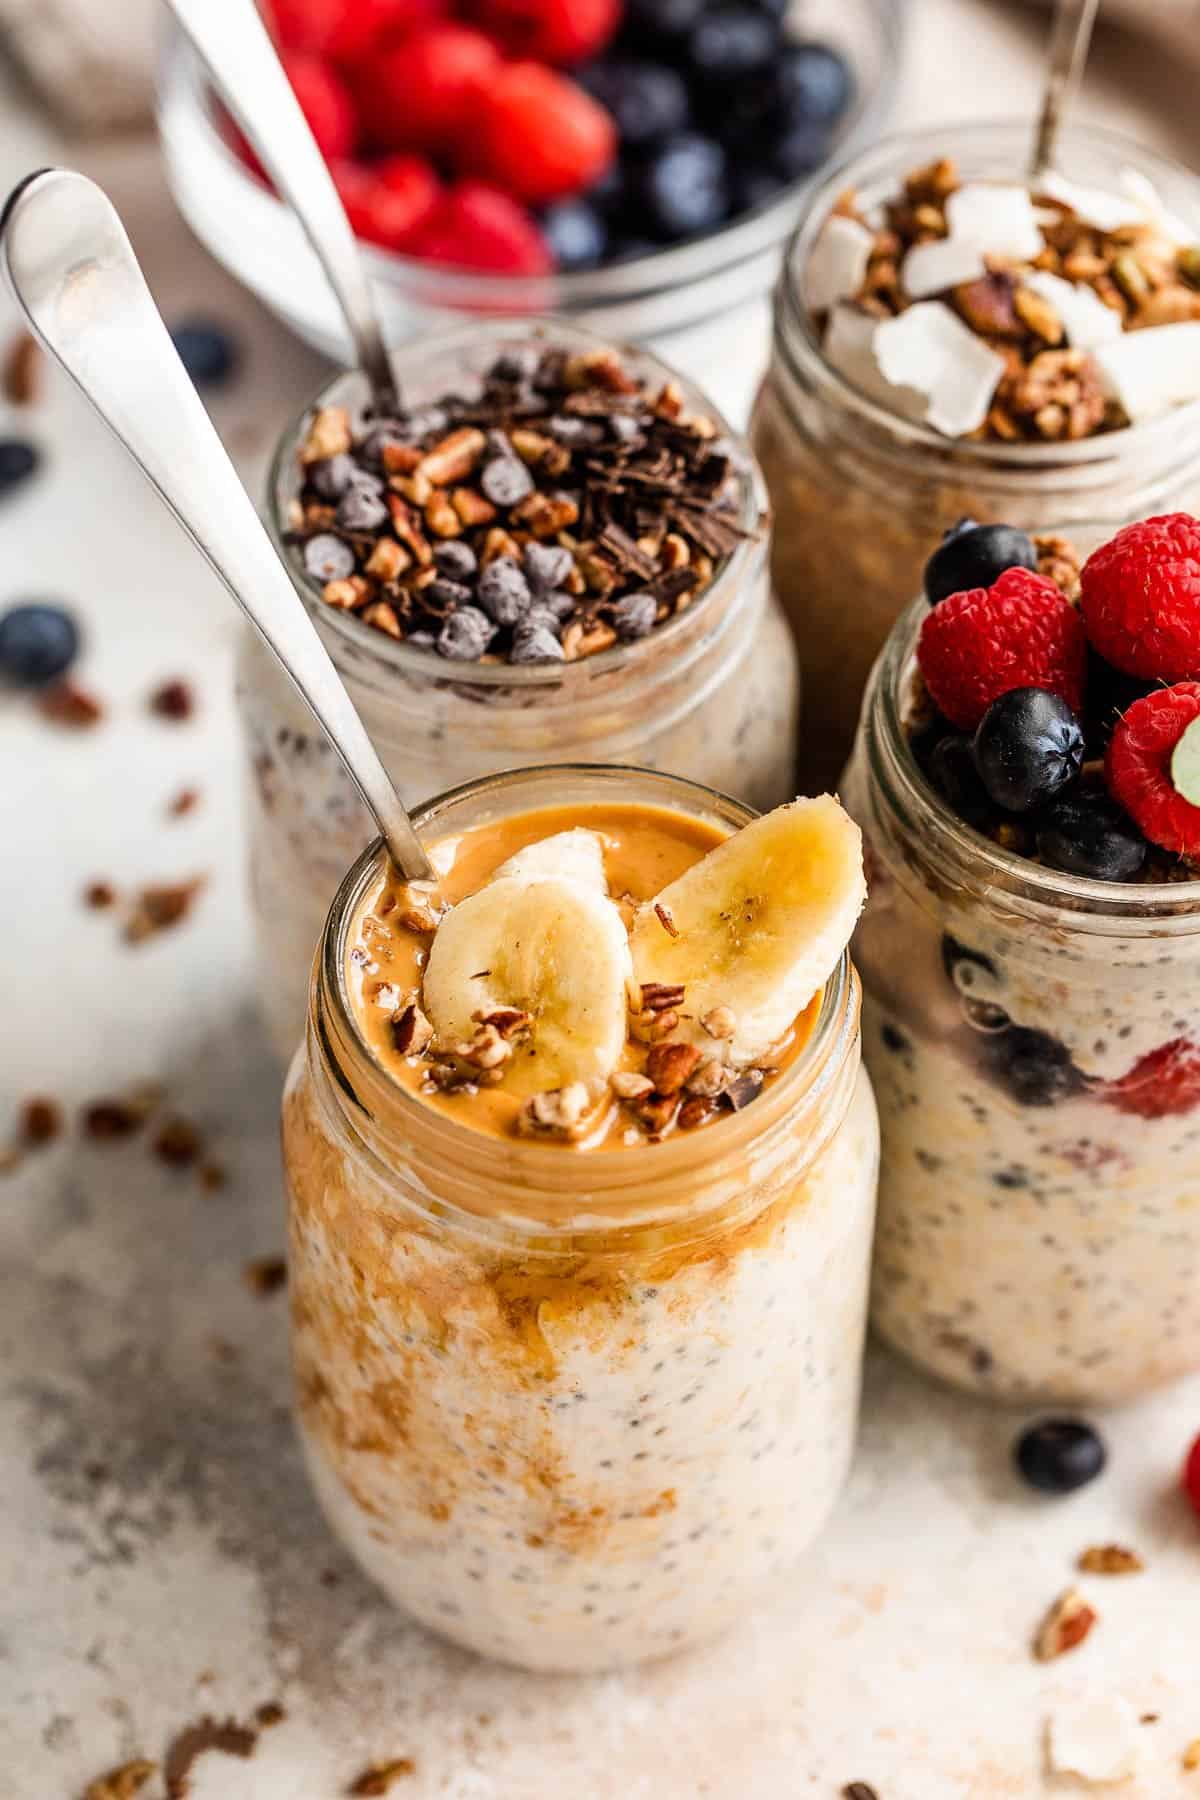 overnight oats in a jar garnished with peanut butter and sliced bananas